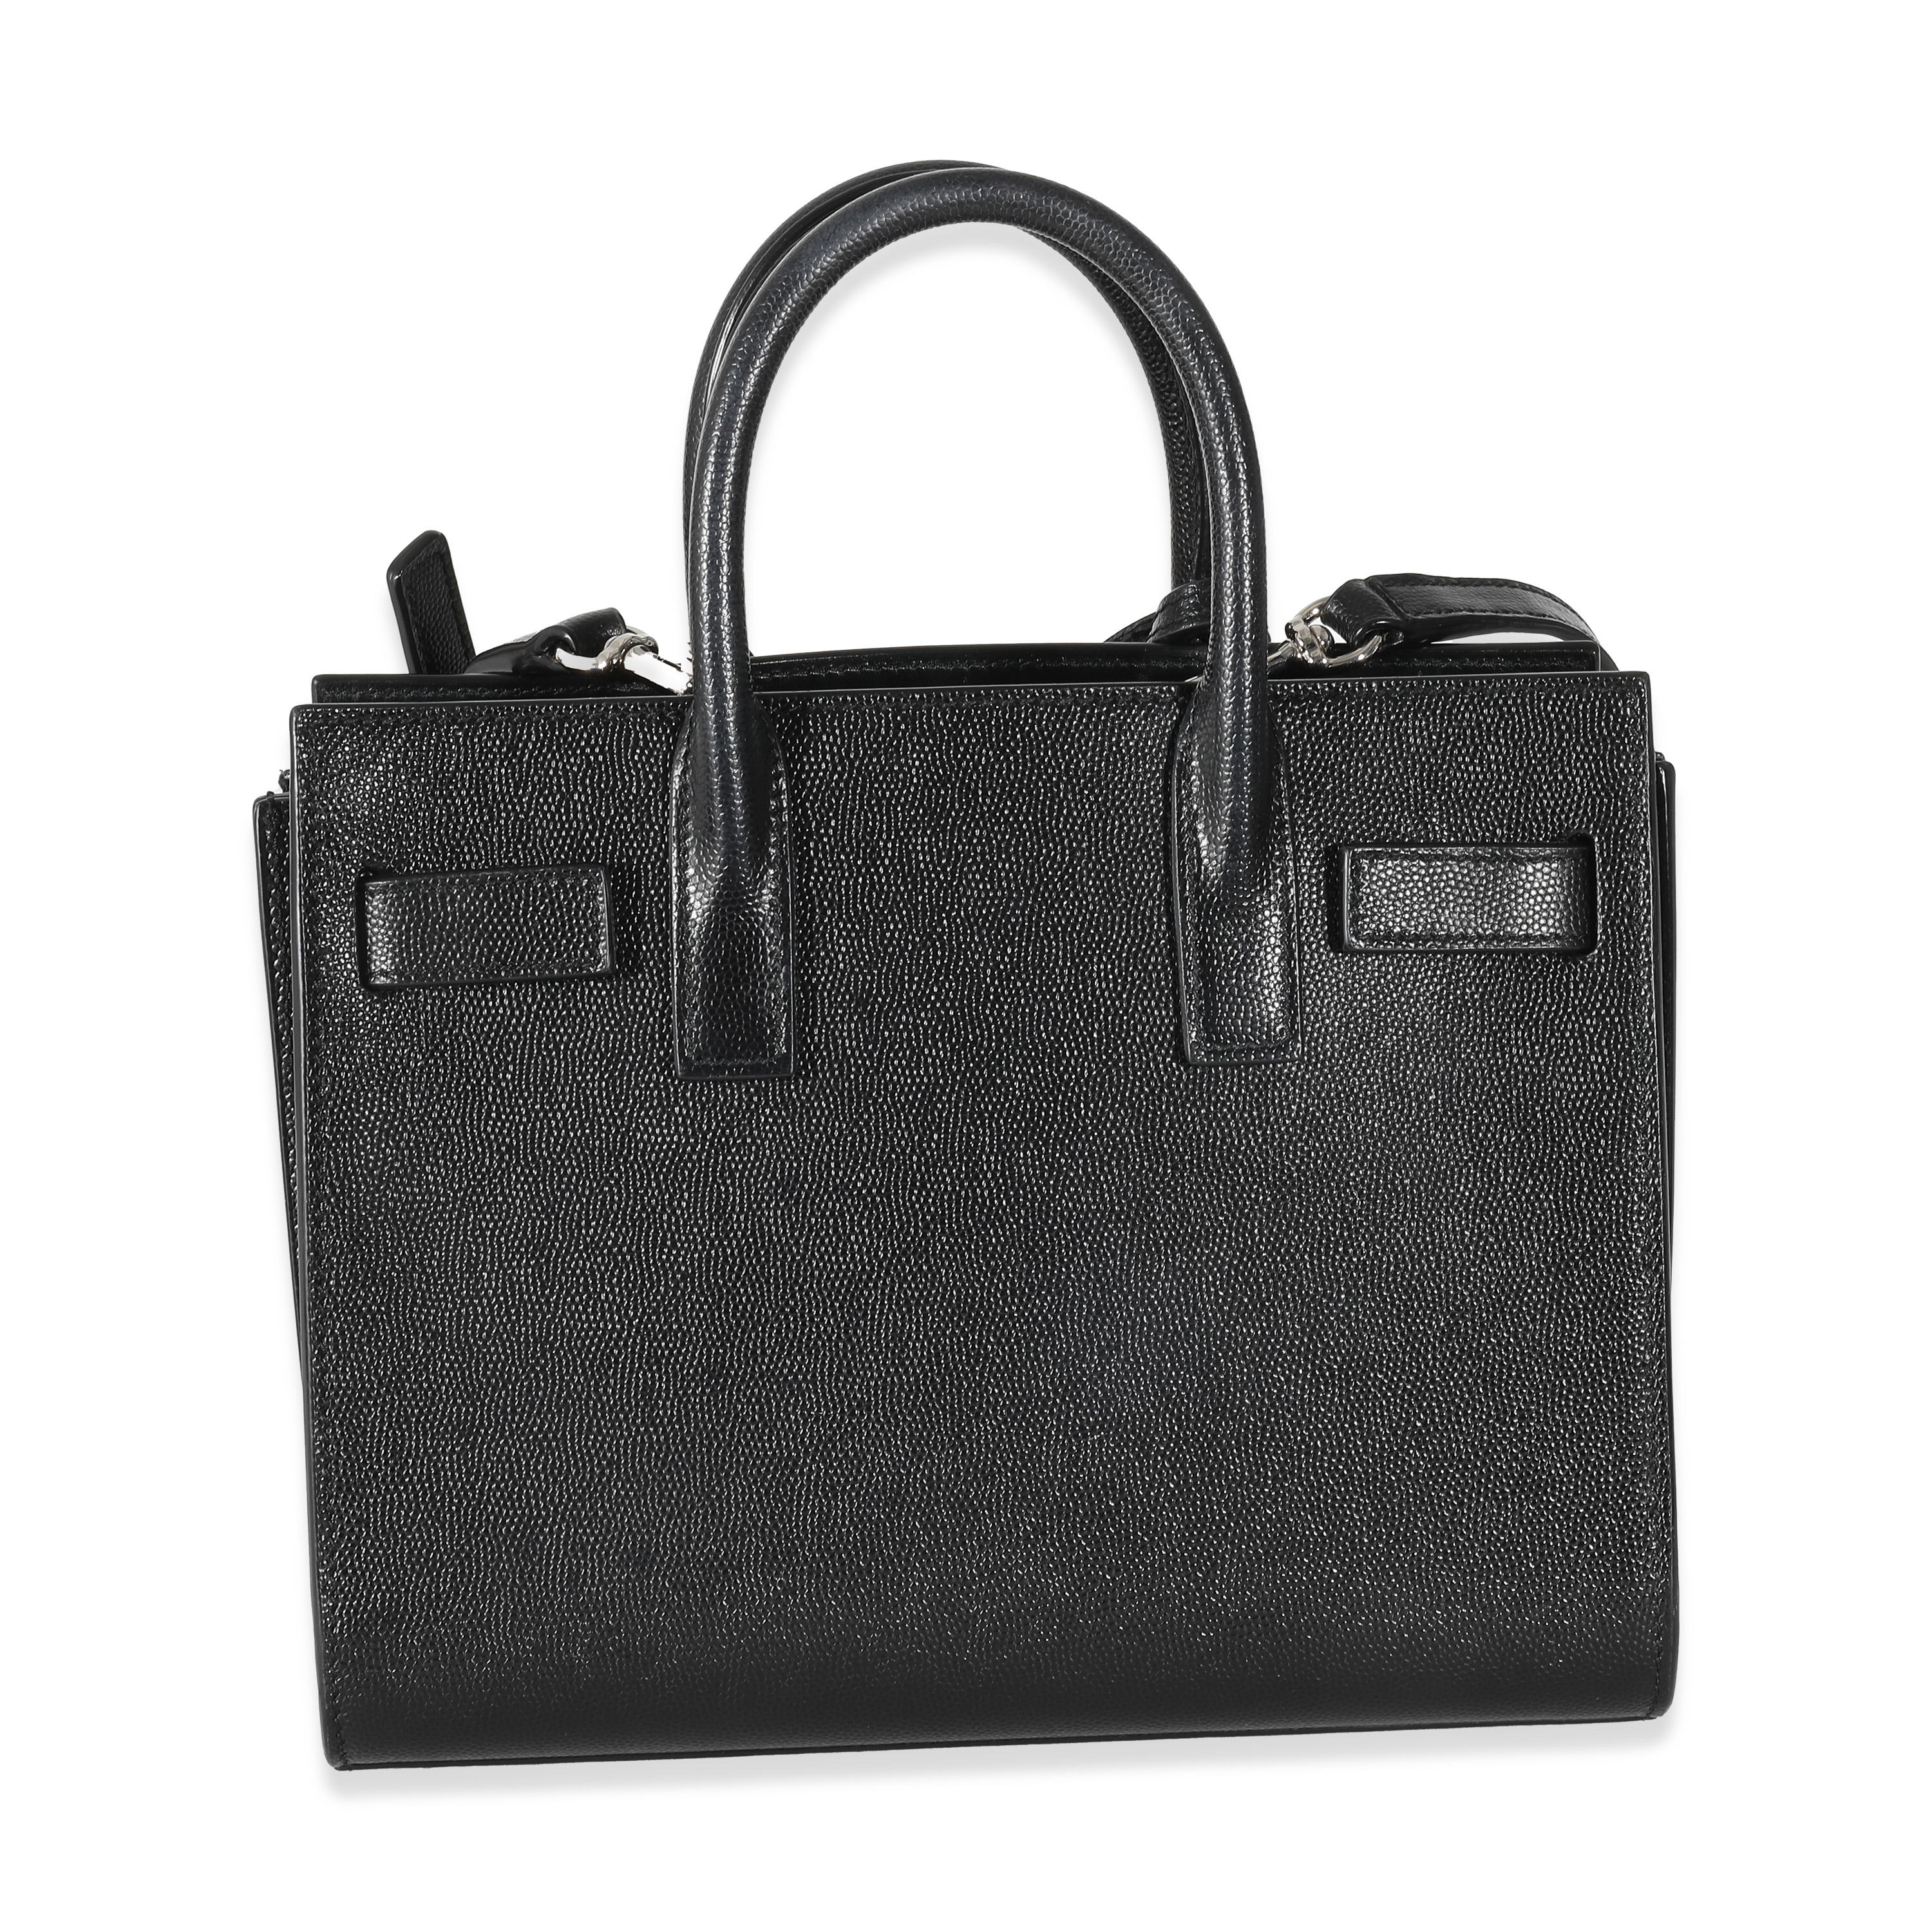 Saint Laurent Black Grained Leather Nano Sac De Jour In Excellent Condition For Sale In New York, NY